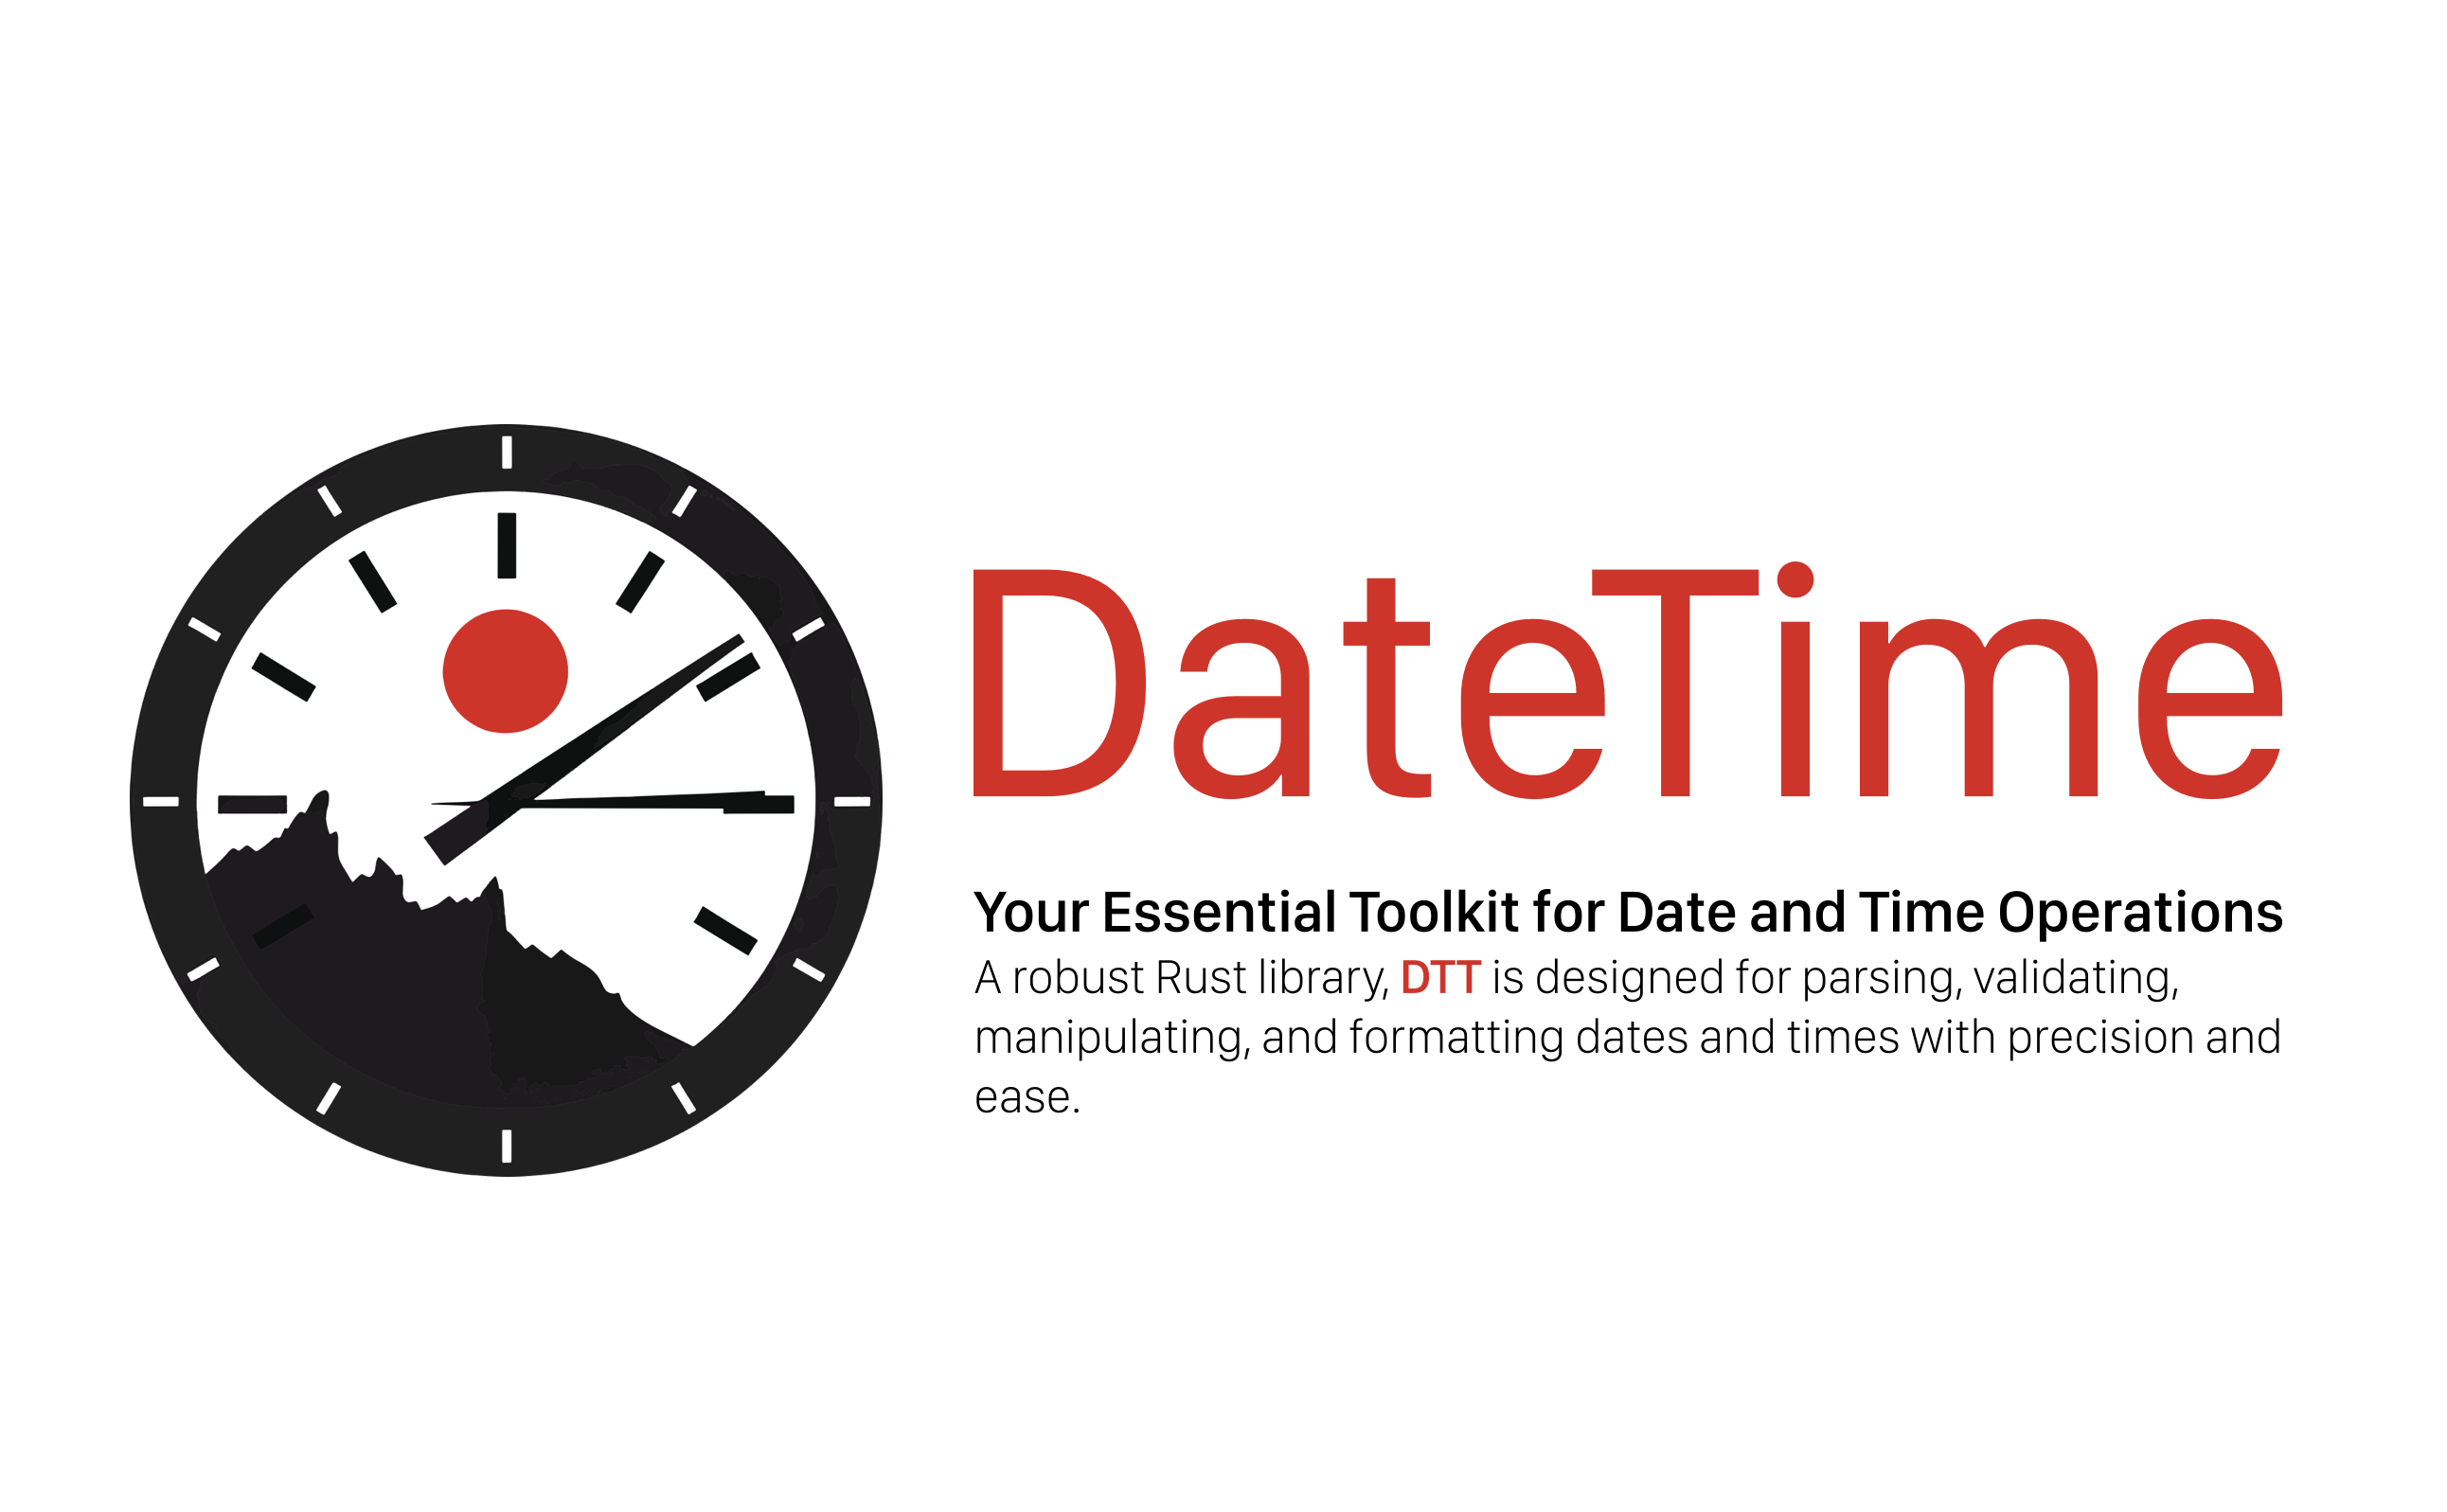 DateTime (DTT), Your Essential Toolkit for Date and Time Operations